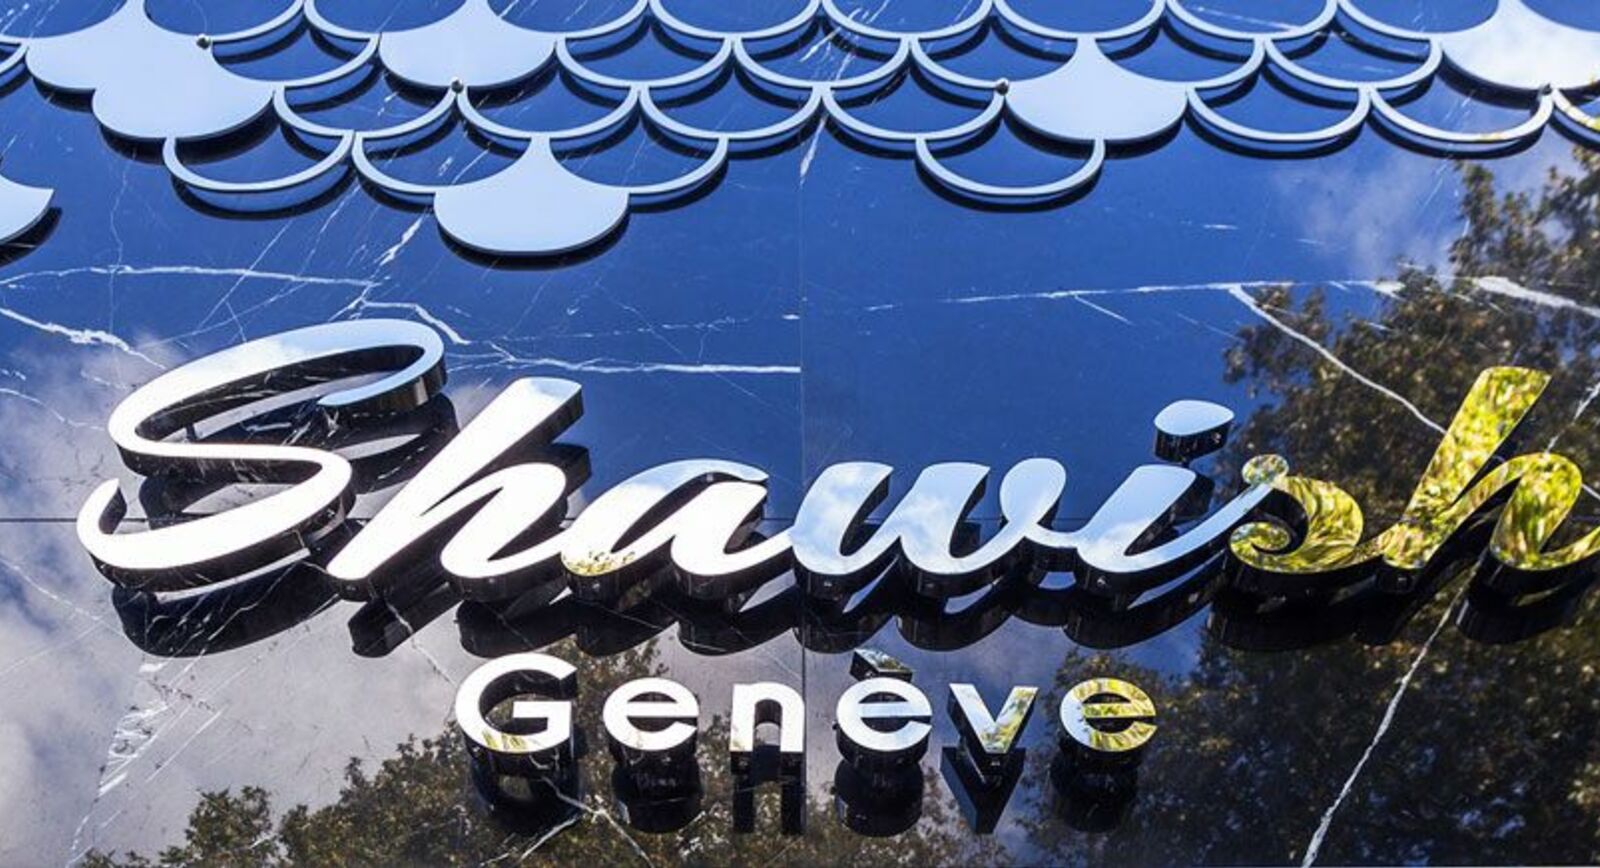 Shawish Genève opens its first flagship store in London